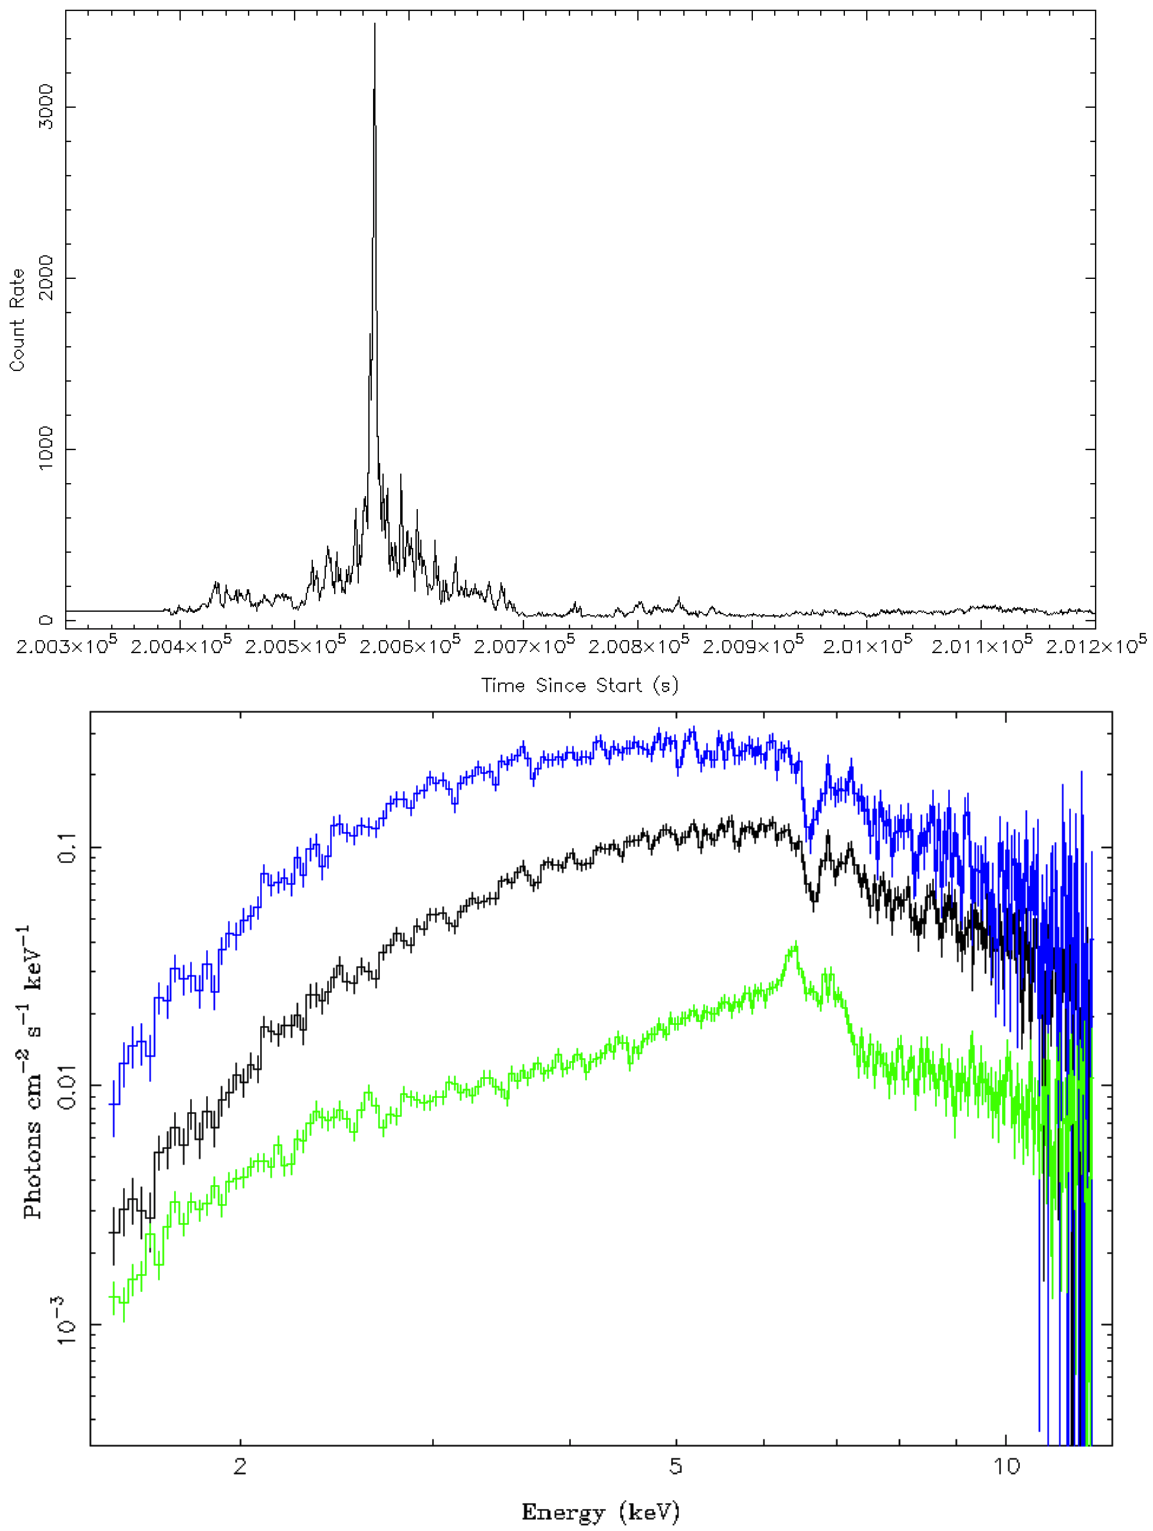 Lightcurve and spectra of rapid flare from GRC 1915+105